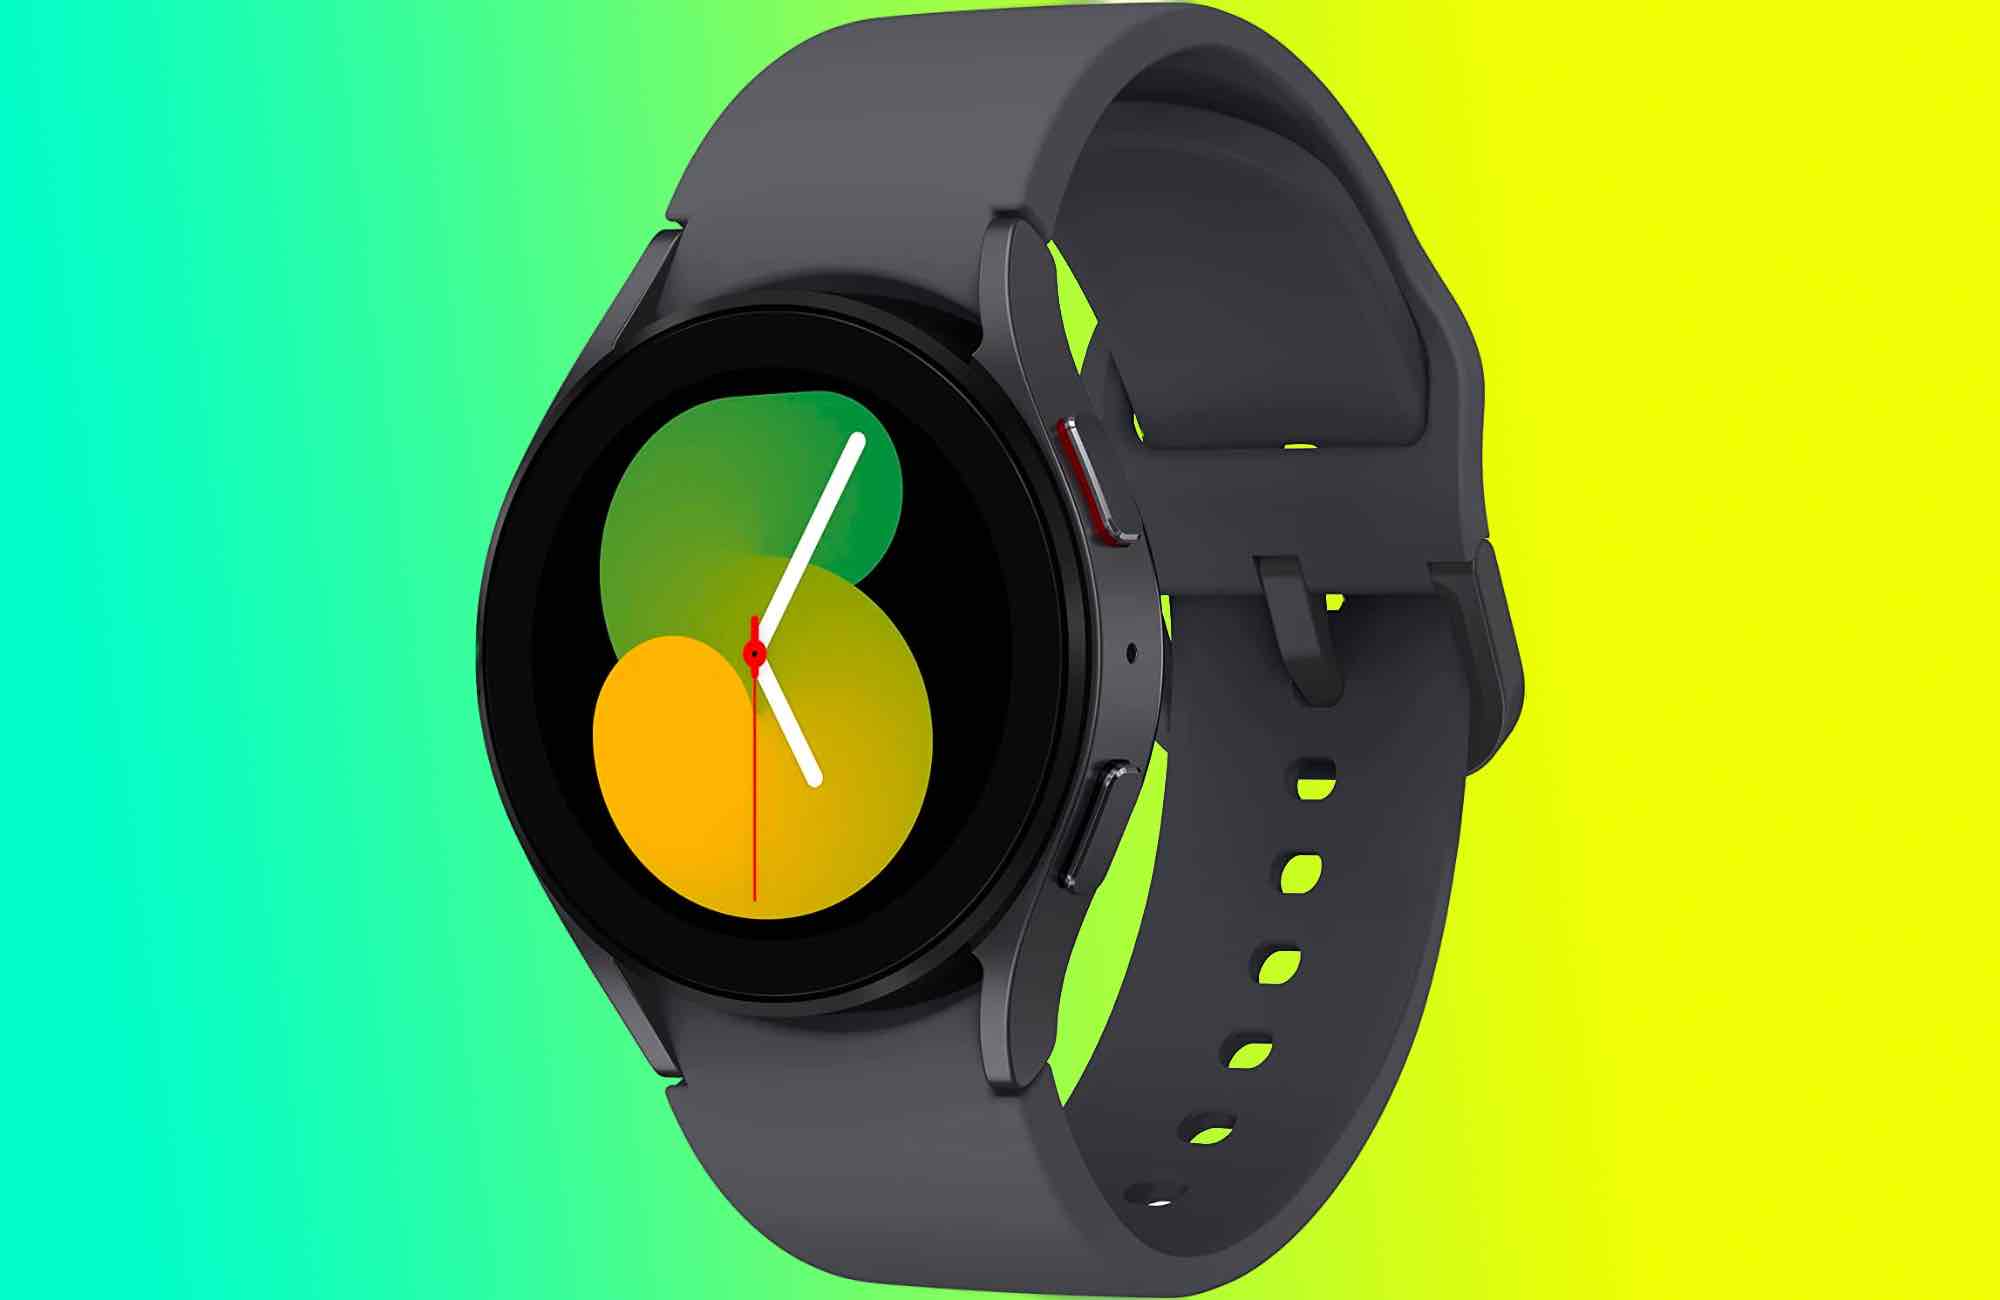 You can save $60 on the best Android smartwatch at Amazon